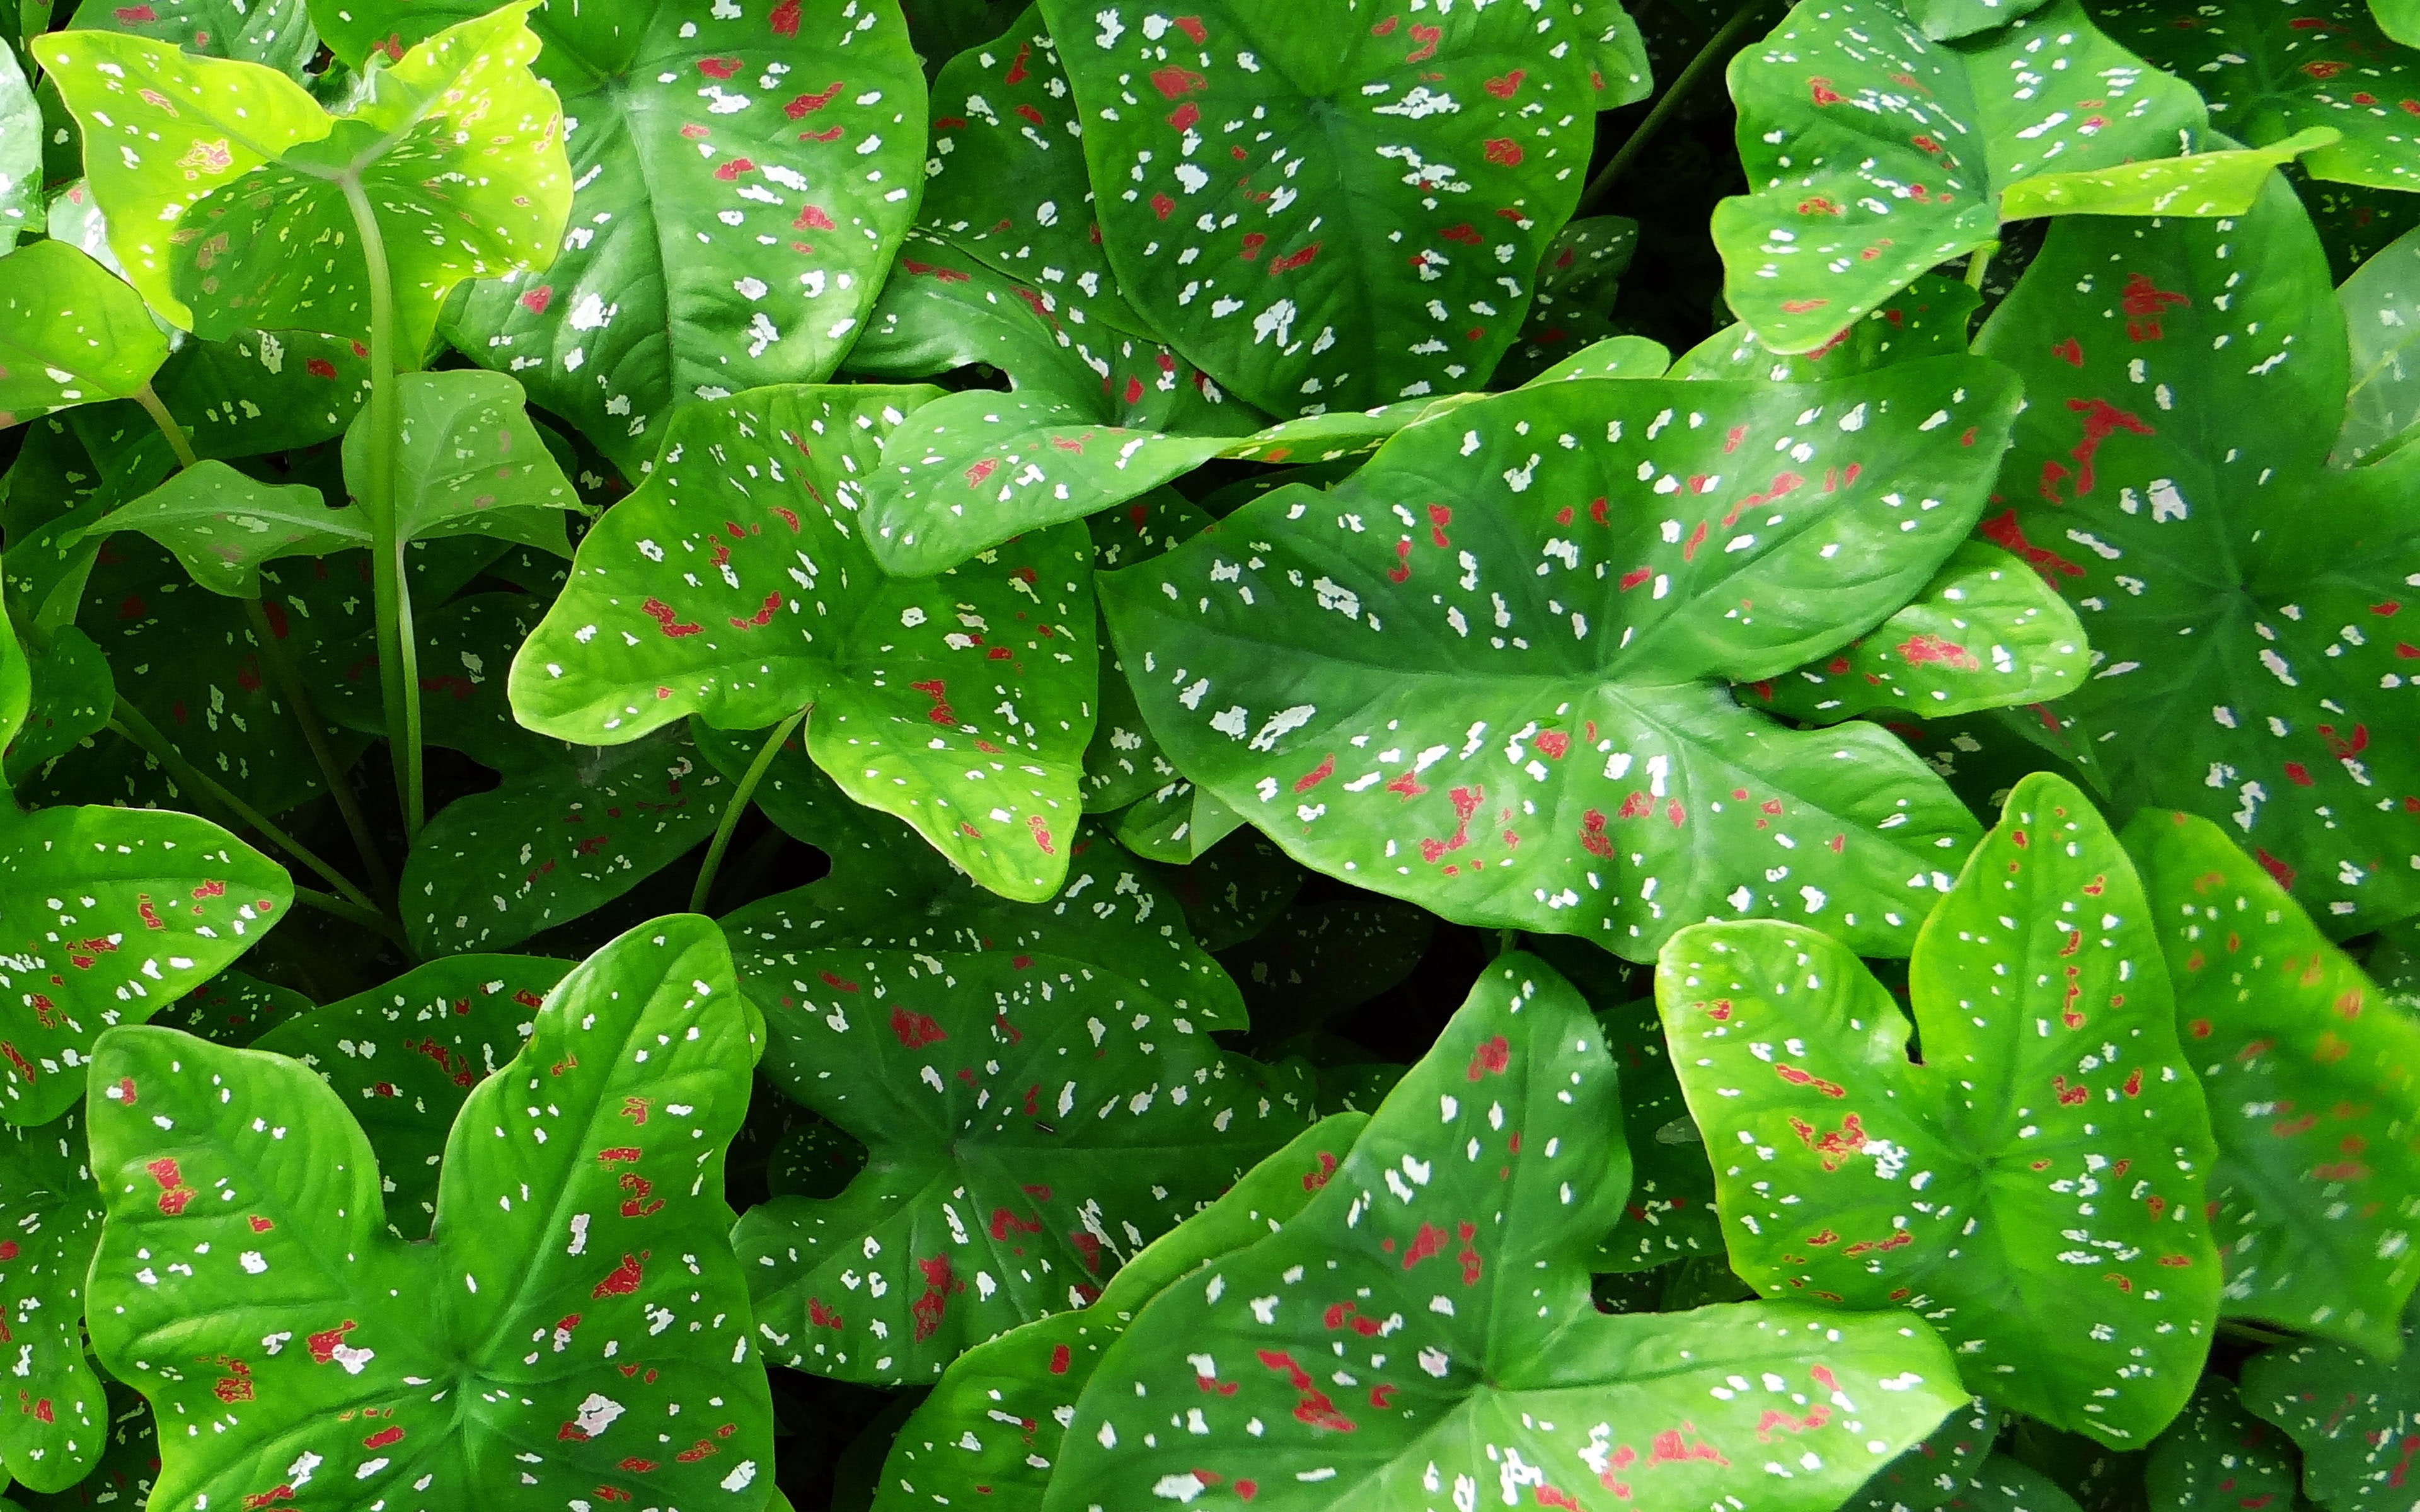 Caladium Plant Light Green Leaves Fluted With White And Red Dotted Hearted Leaves 3840×2400